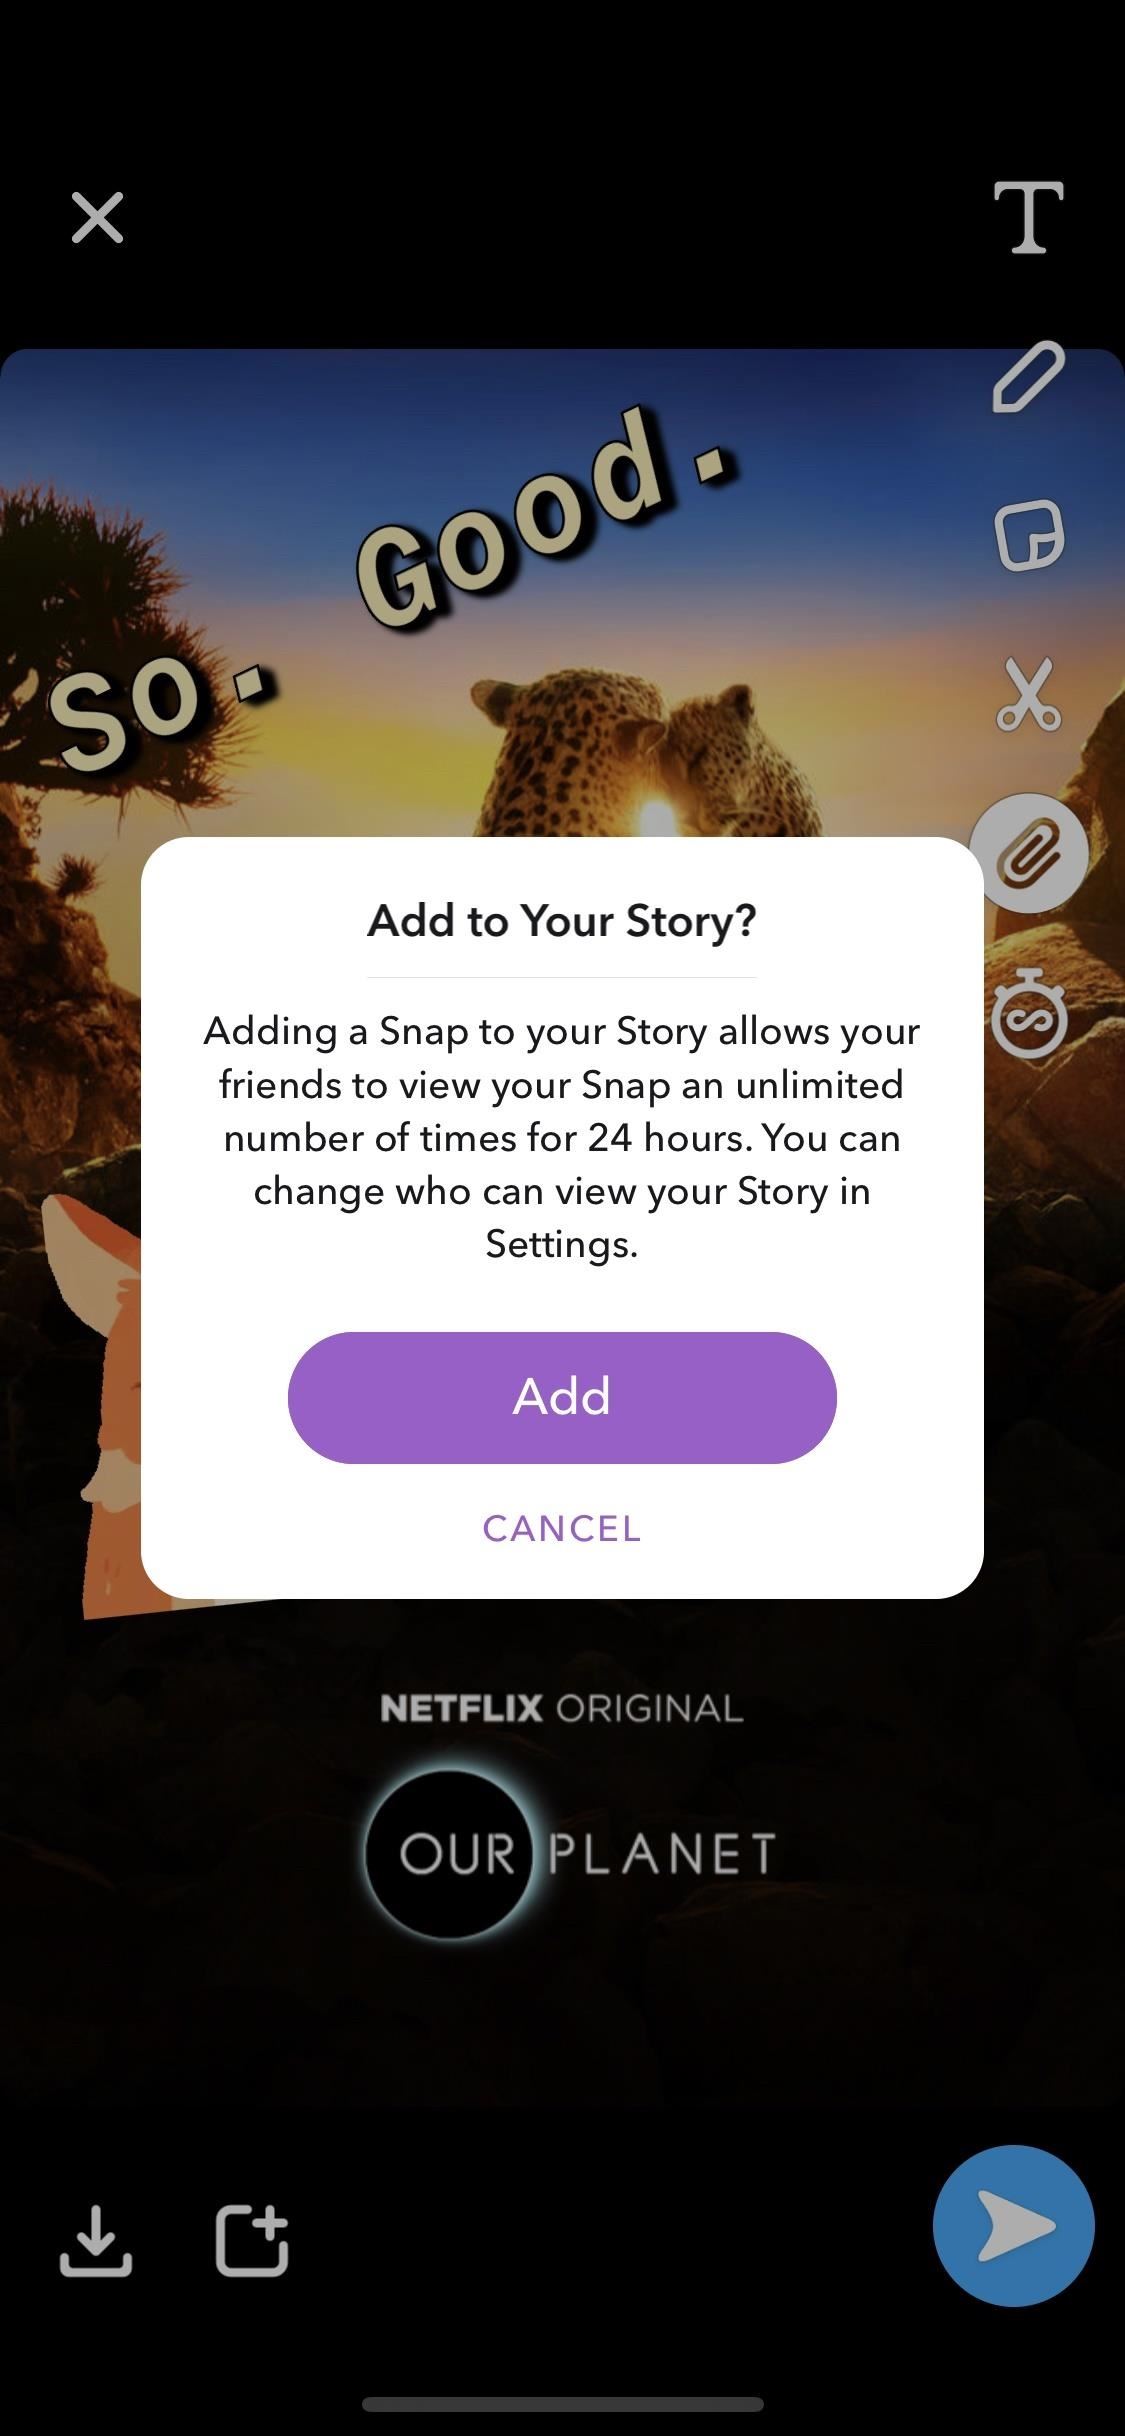 Share What You're Watching on Netflix to Your Snapchat Story So Your Friends Can Watch Too